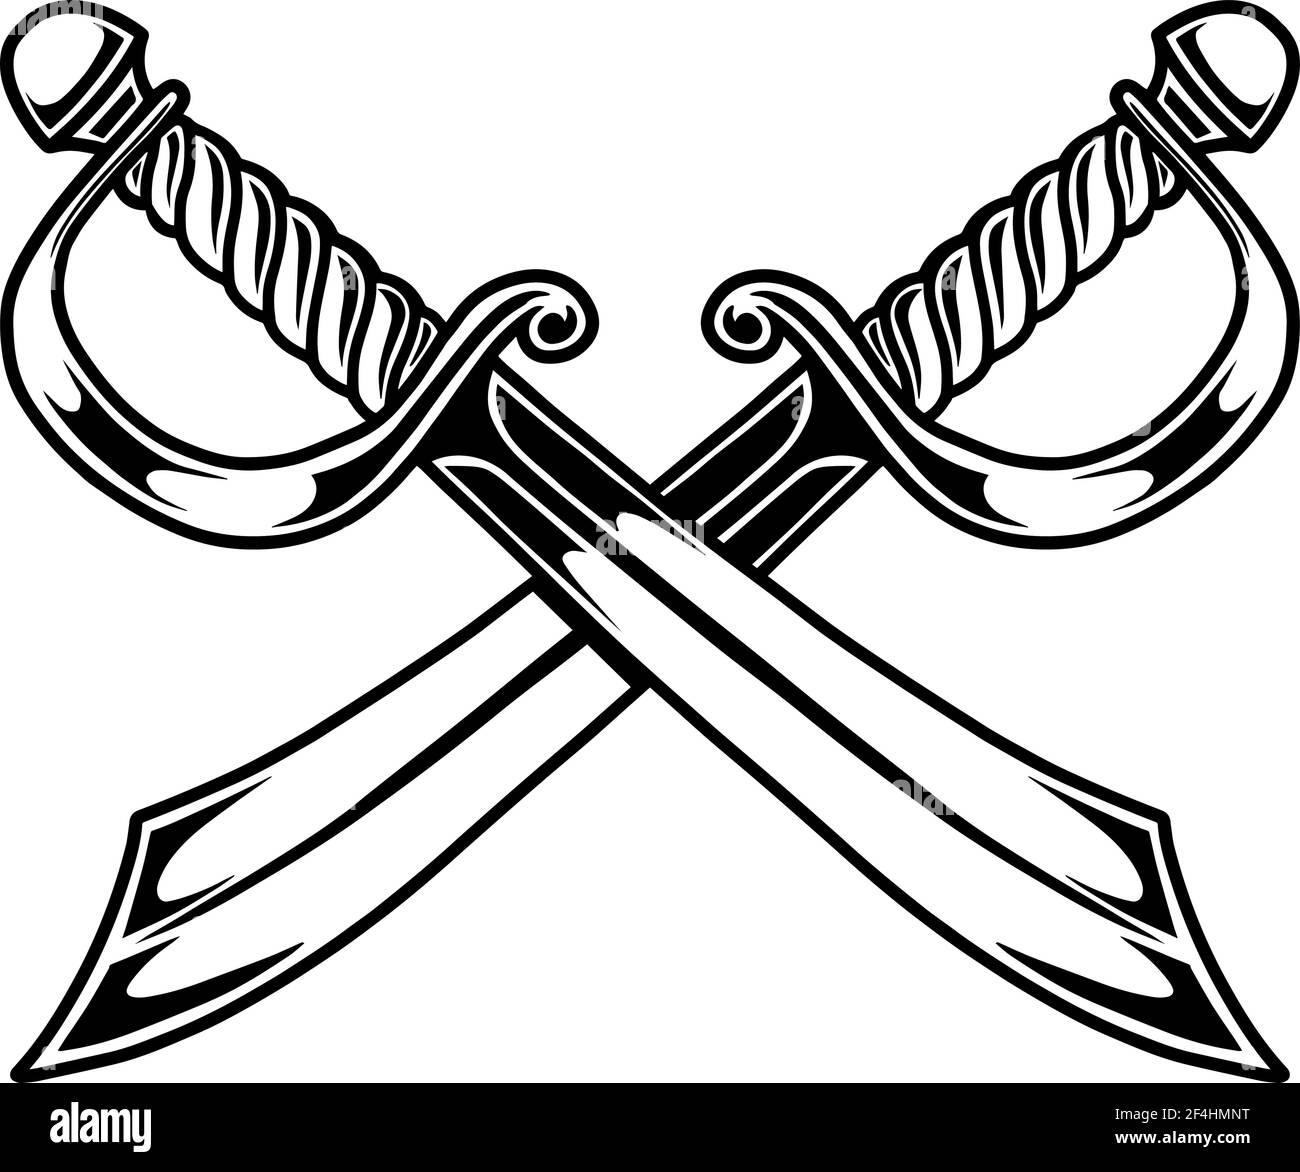 Illustration of crossed pirate swords in engraving style. Design element for poster, card, banner, sign. Vector illustration Stock Vector